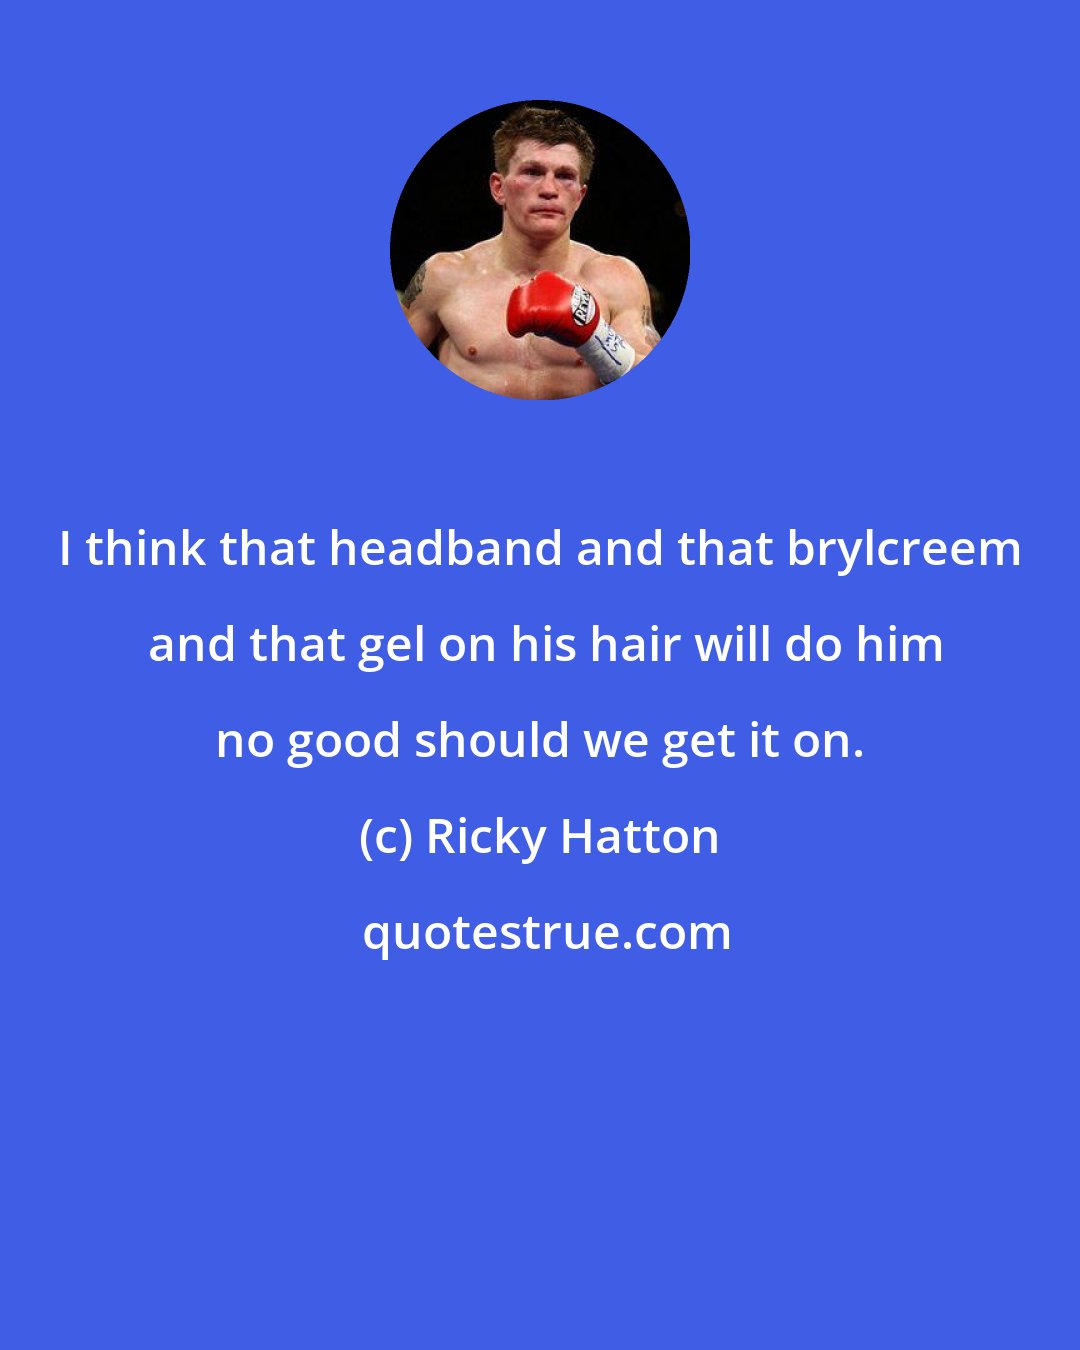 Ricky Hatton: I think that headband and that brylcreem  and that gel on his hair will do him no good should we get it on.